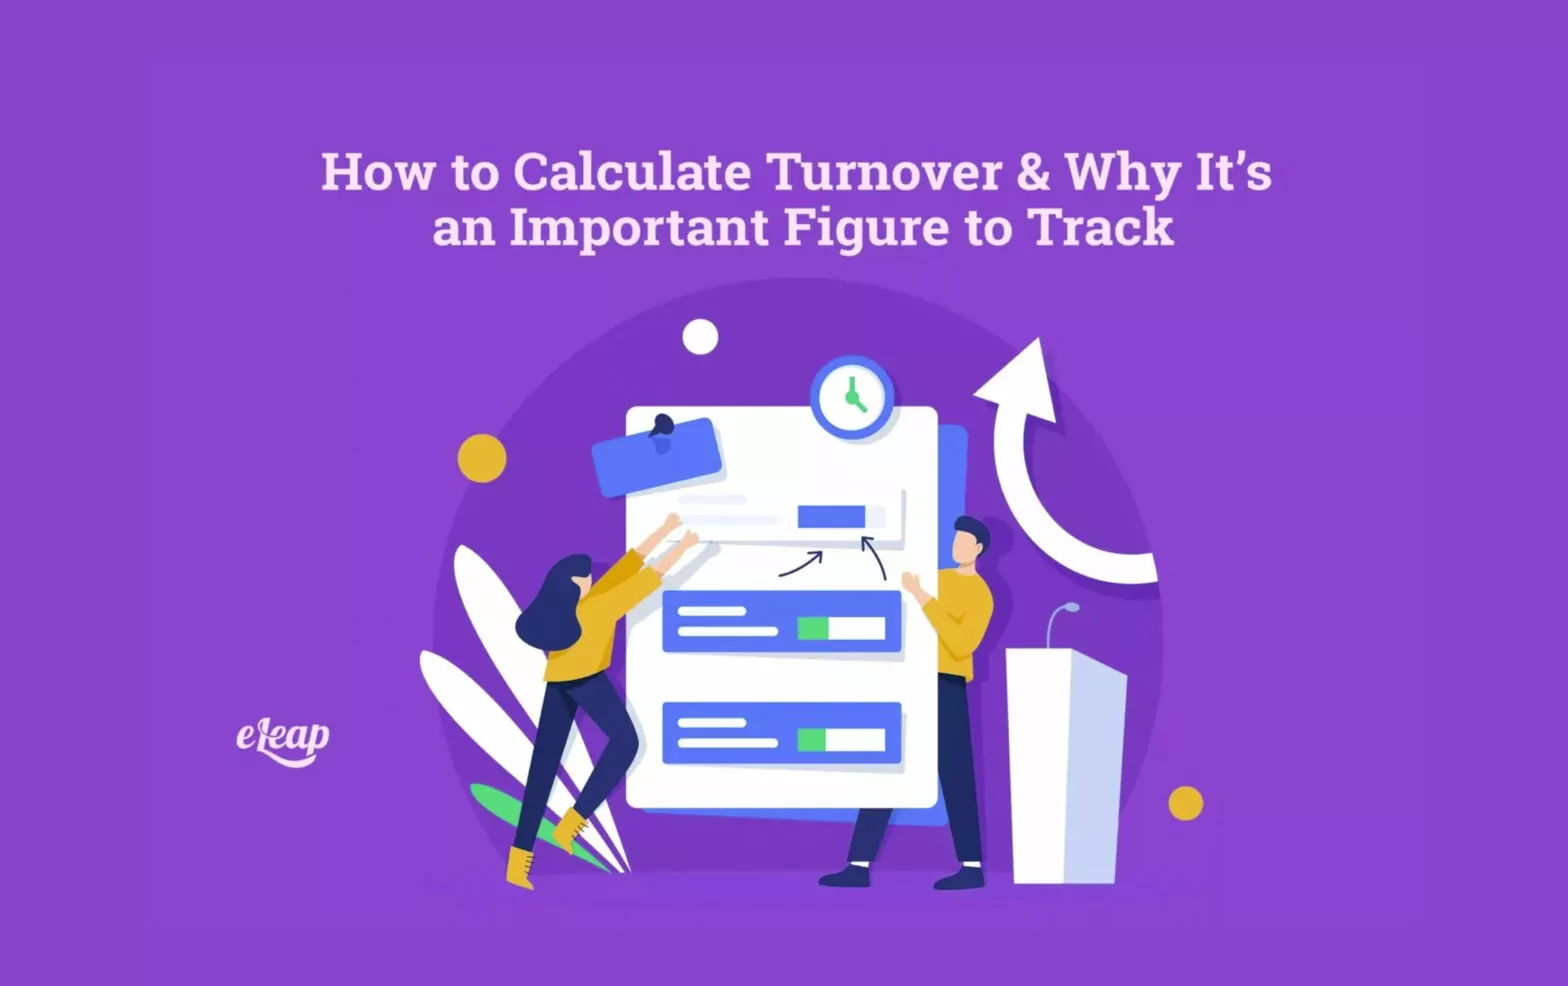 How to Calculate Turnover & Why It’s an Important Figure to Track